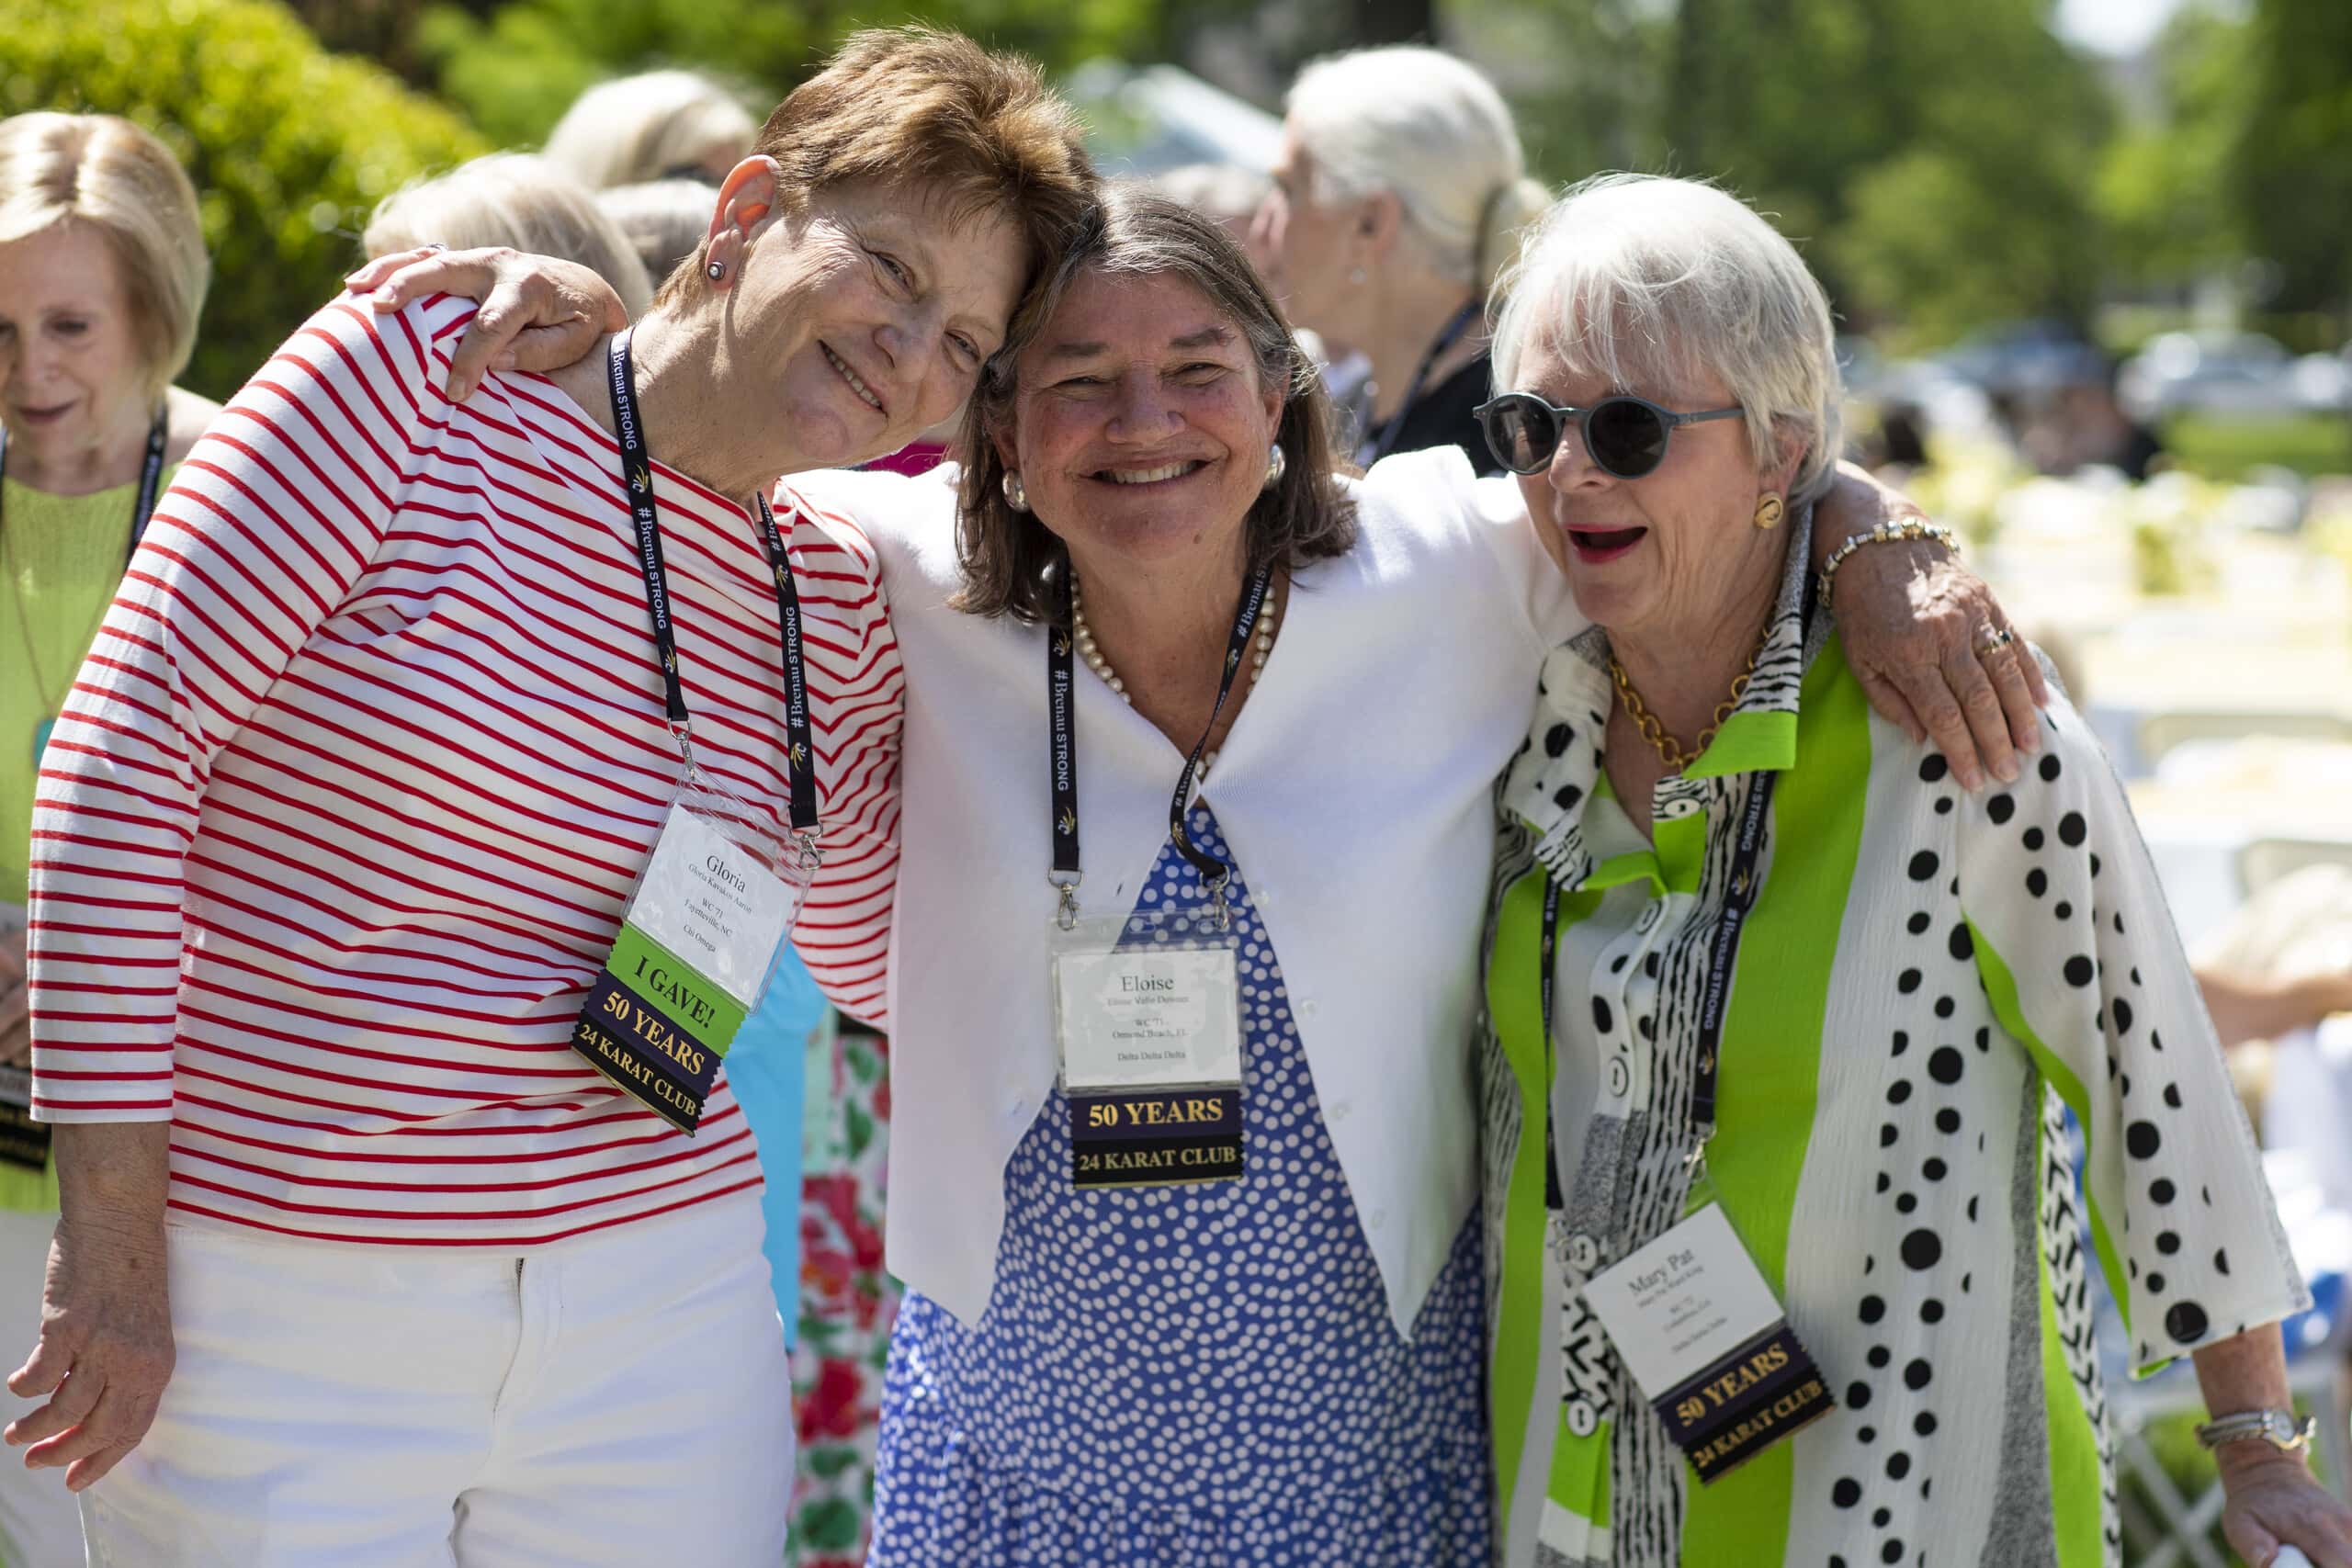 Three Brenau alumnae pose together for a photo at Alumni Reunion Weekend 2022.